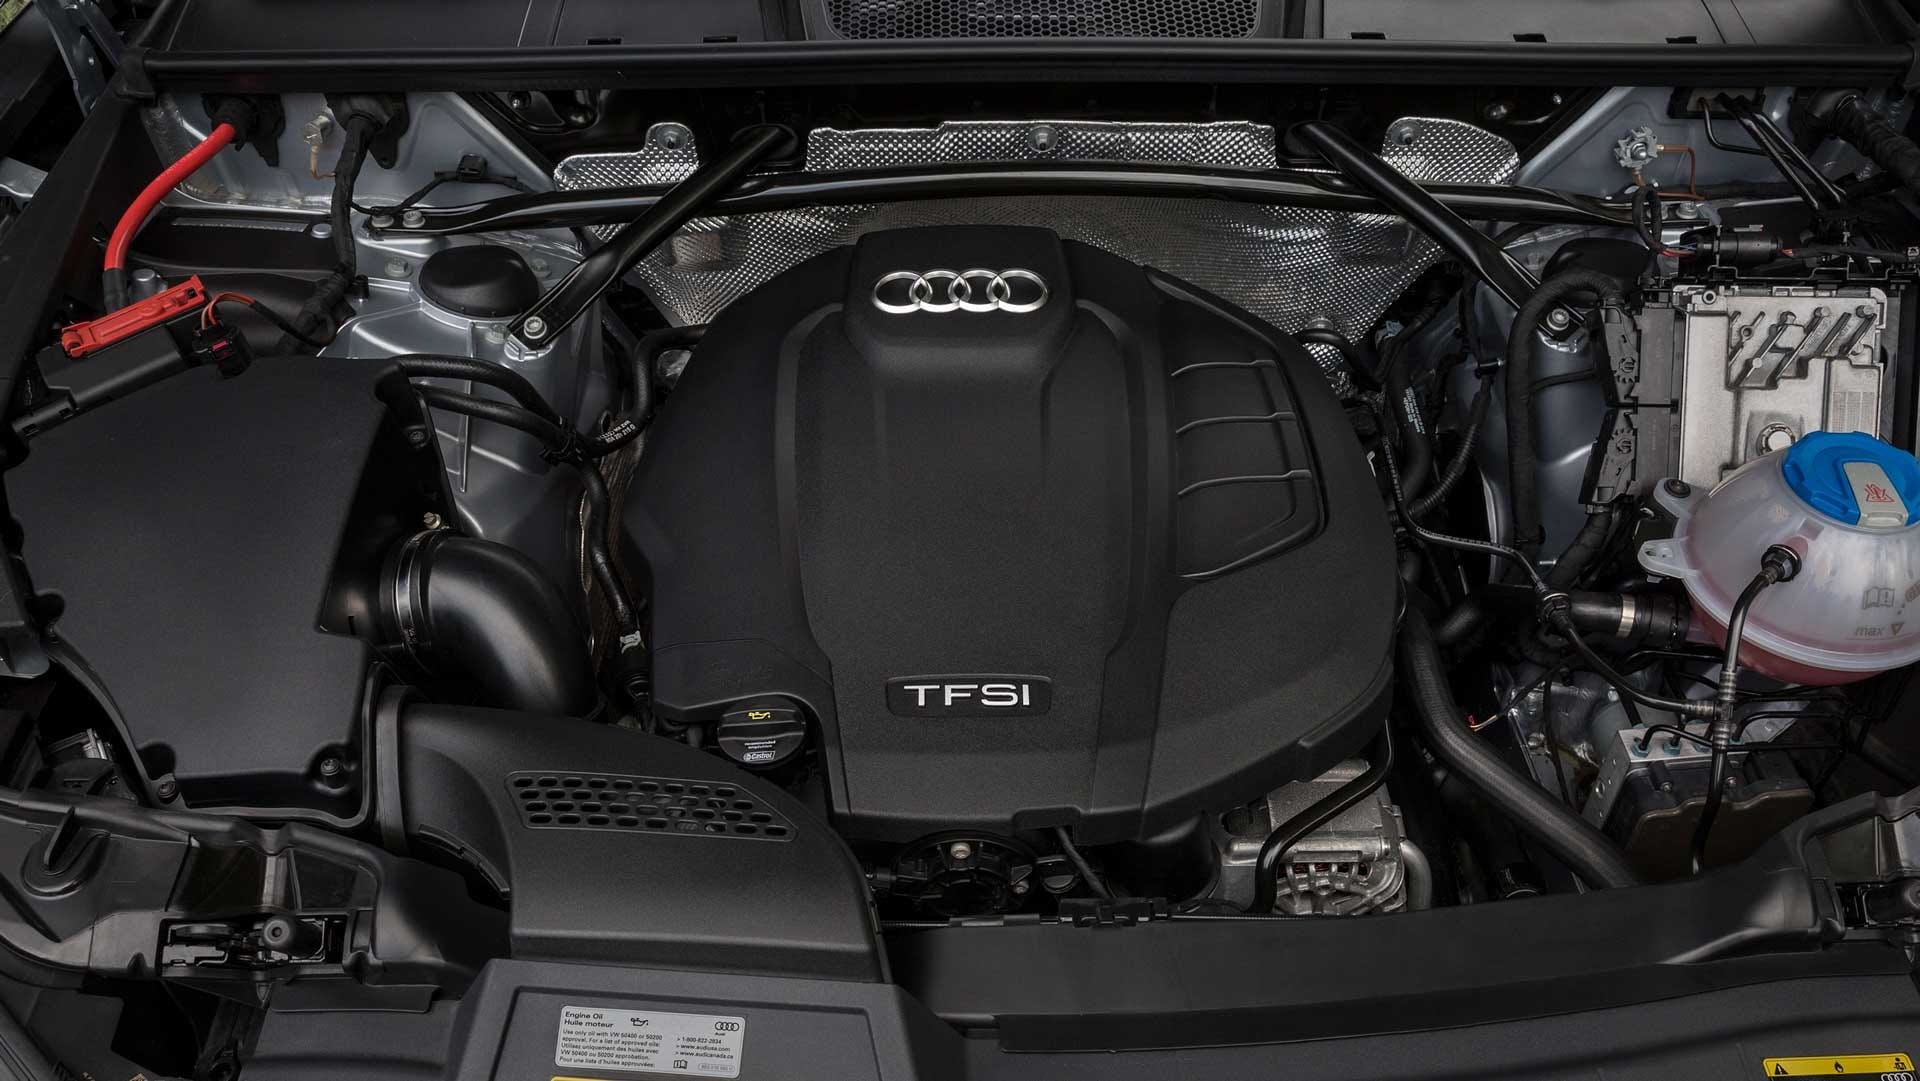 2022 Audi Q5 up to 261 horepower with turbo engine